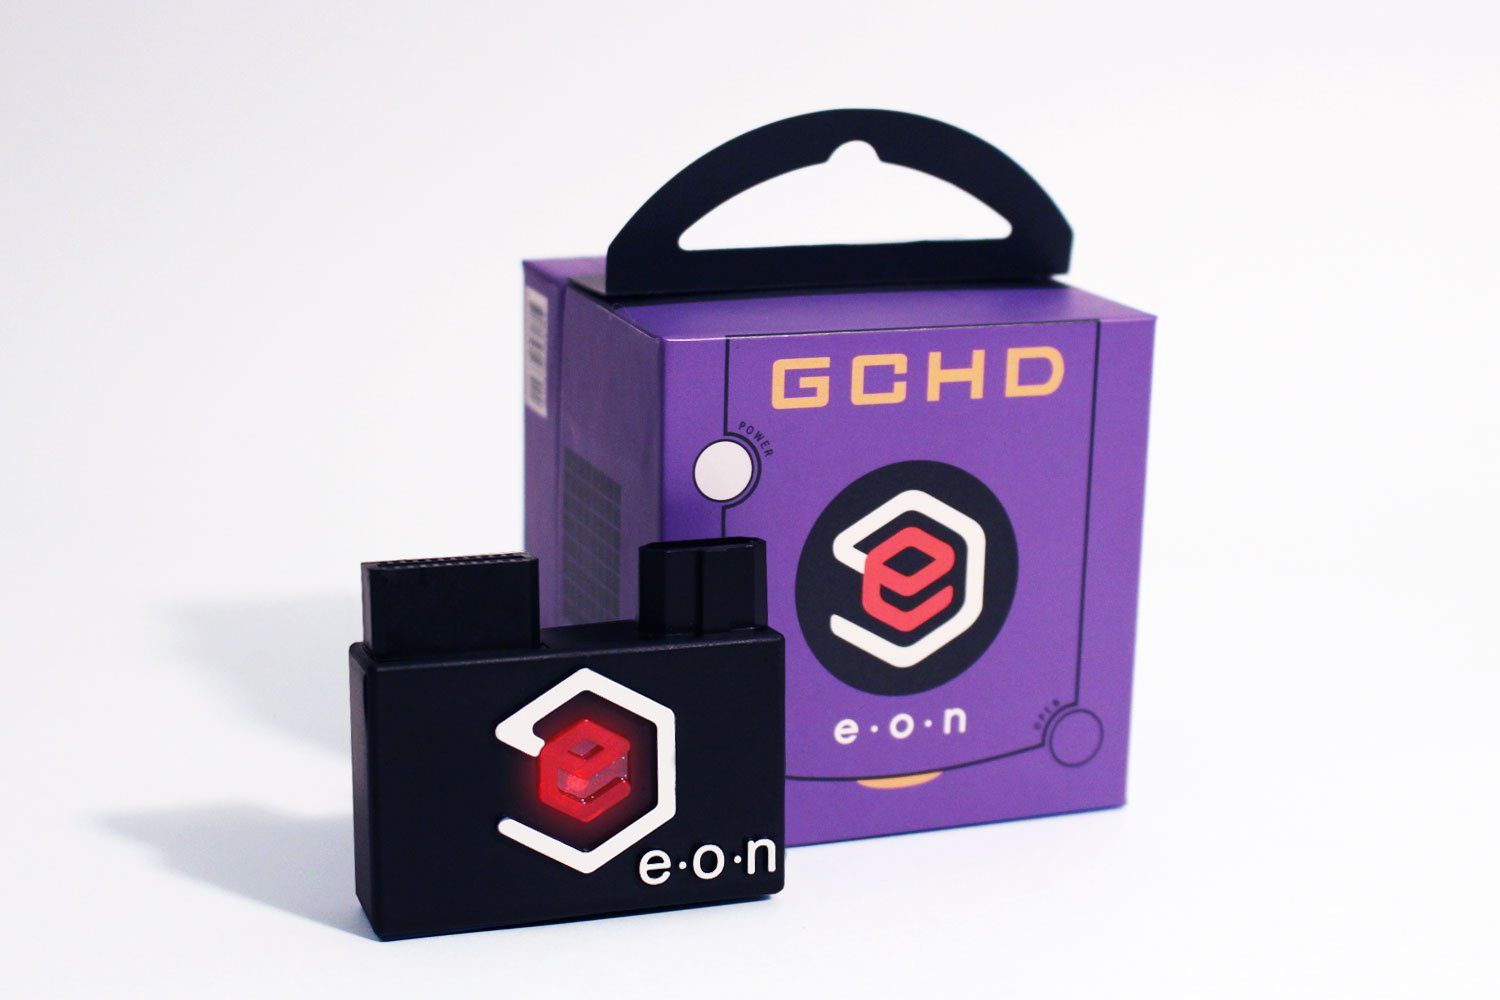 The GCHD is the GameCube’s Most Important Accessory – REVIEW